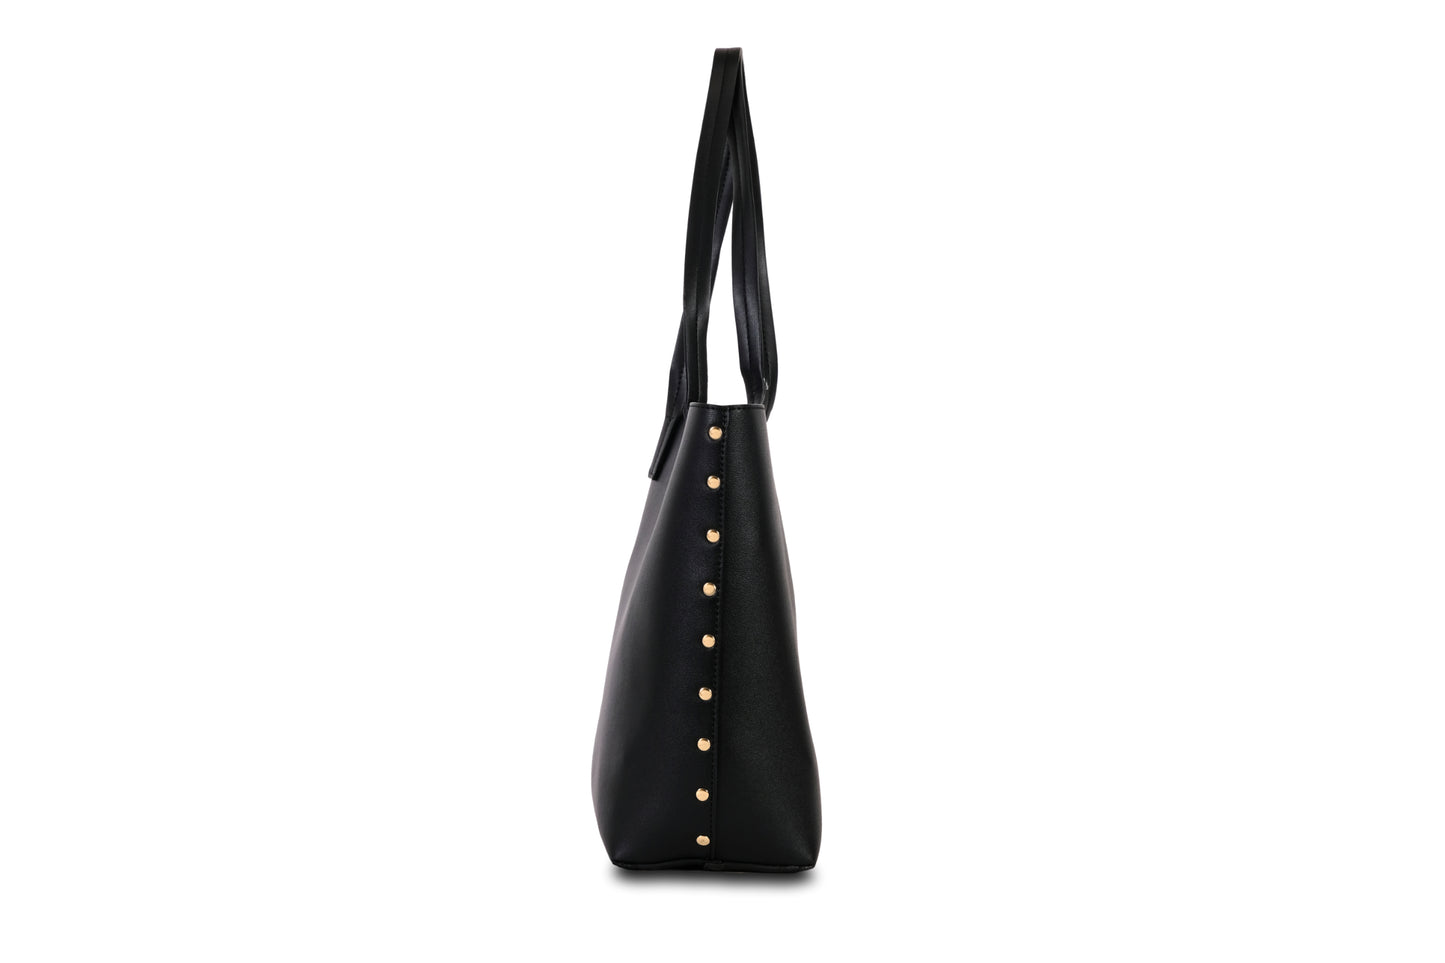 Rowi Pebble Grain Faux Leather Midnight Black Tote Bag Handbag made by Dewi Maya side view available at the best boutique in Upstate South Carolina Spartanburg Greenville Dewi Maya Boutique